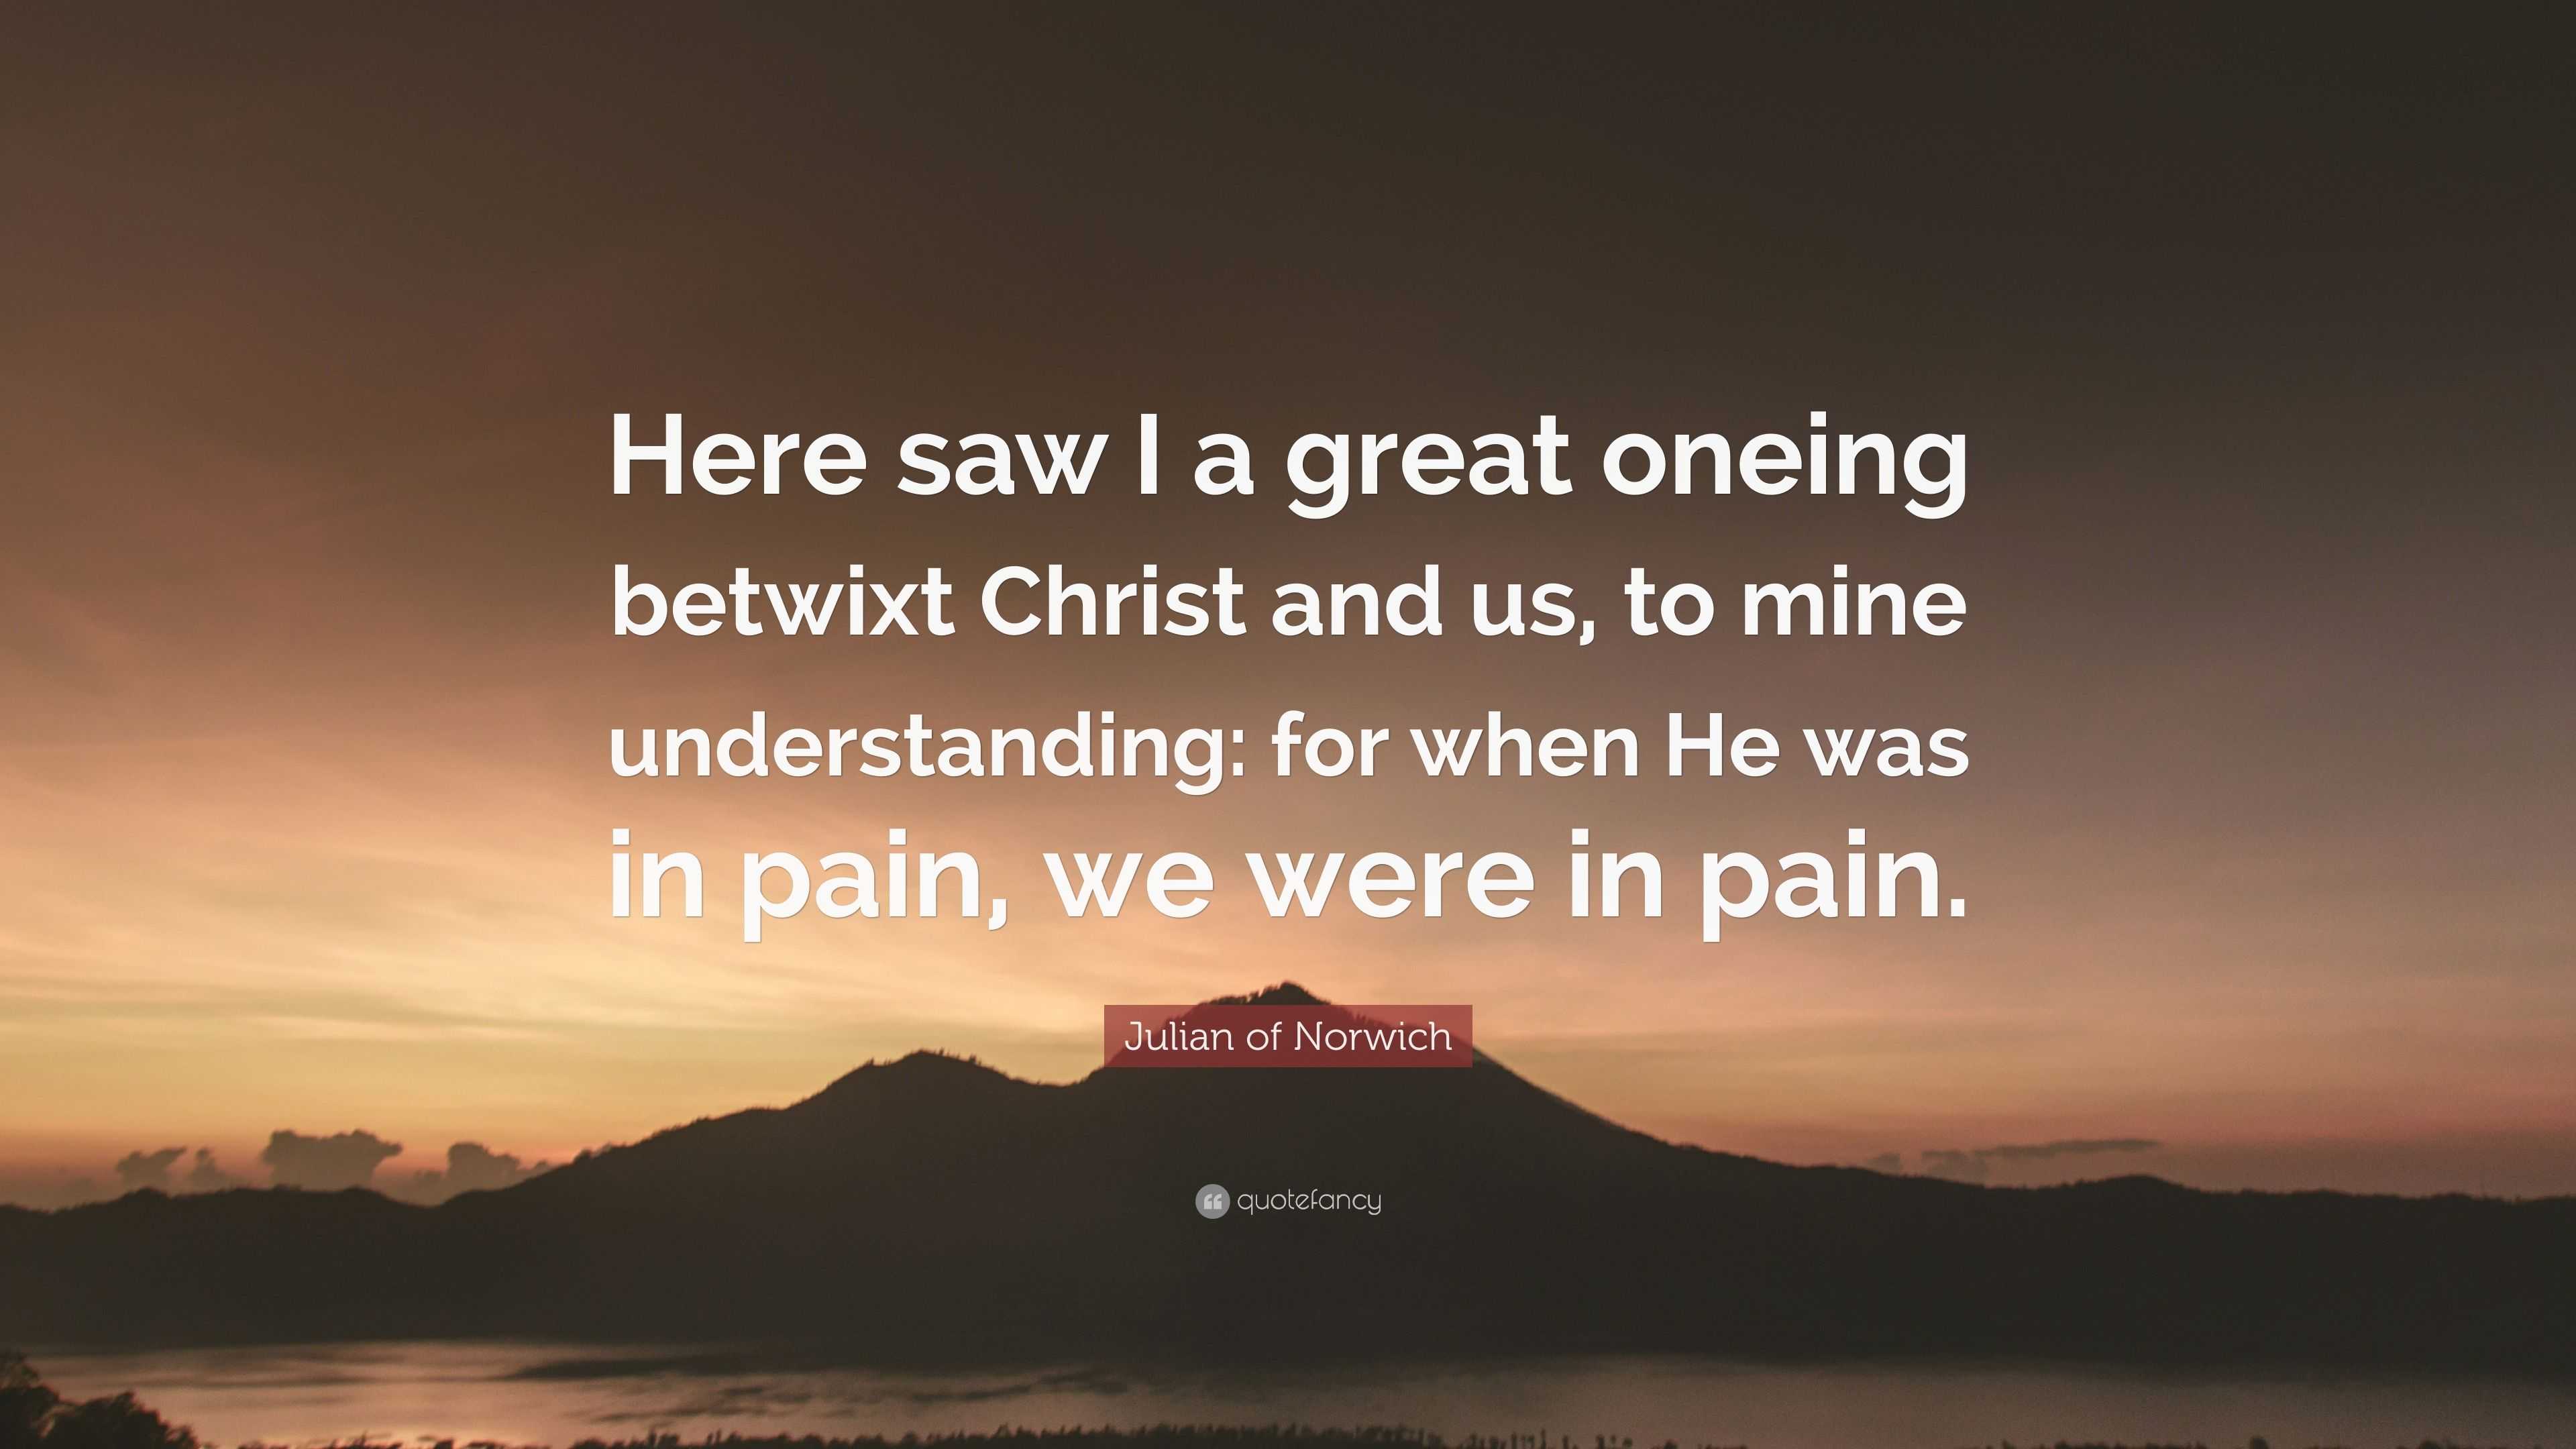 Julian of Norwich Quote: “Here saw I a great oneing betwixt Christ and ...